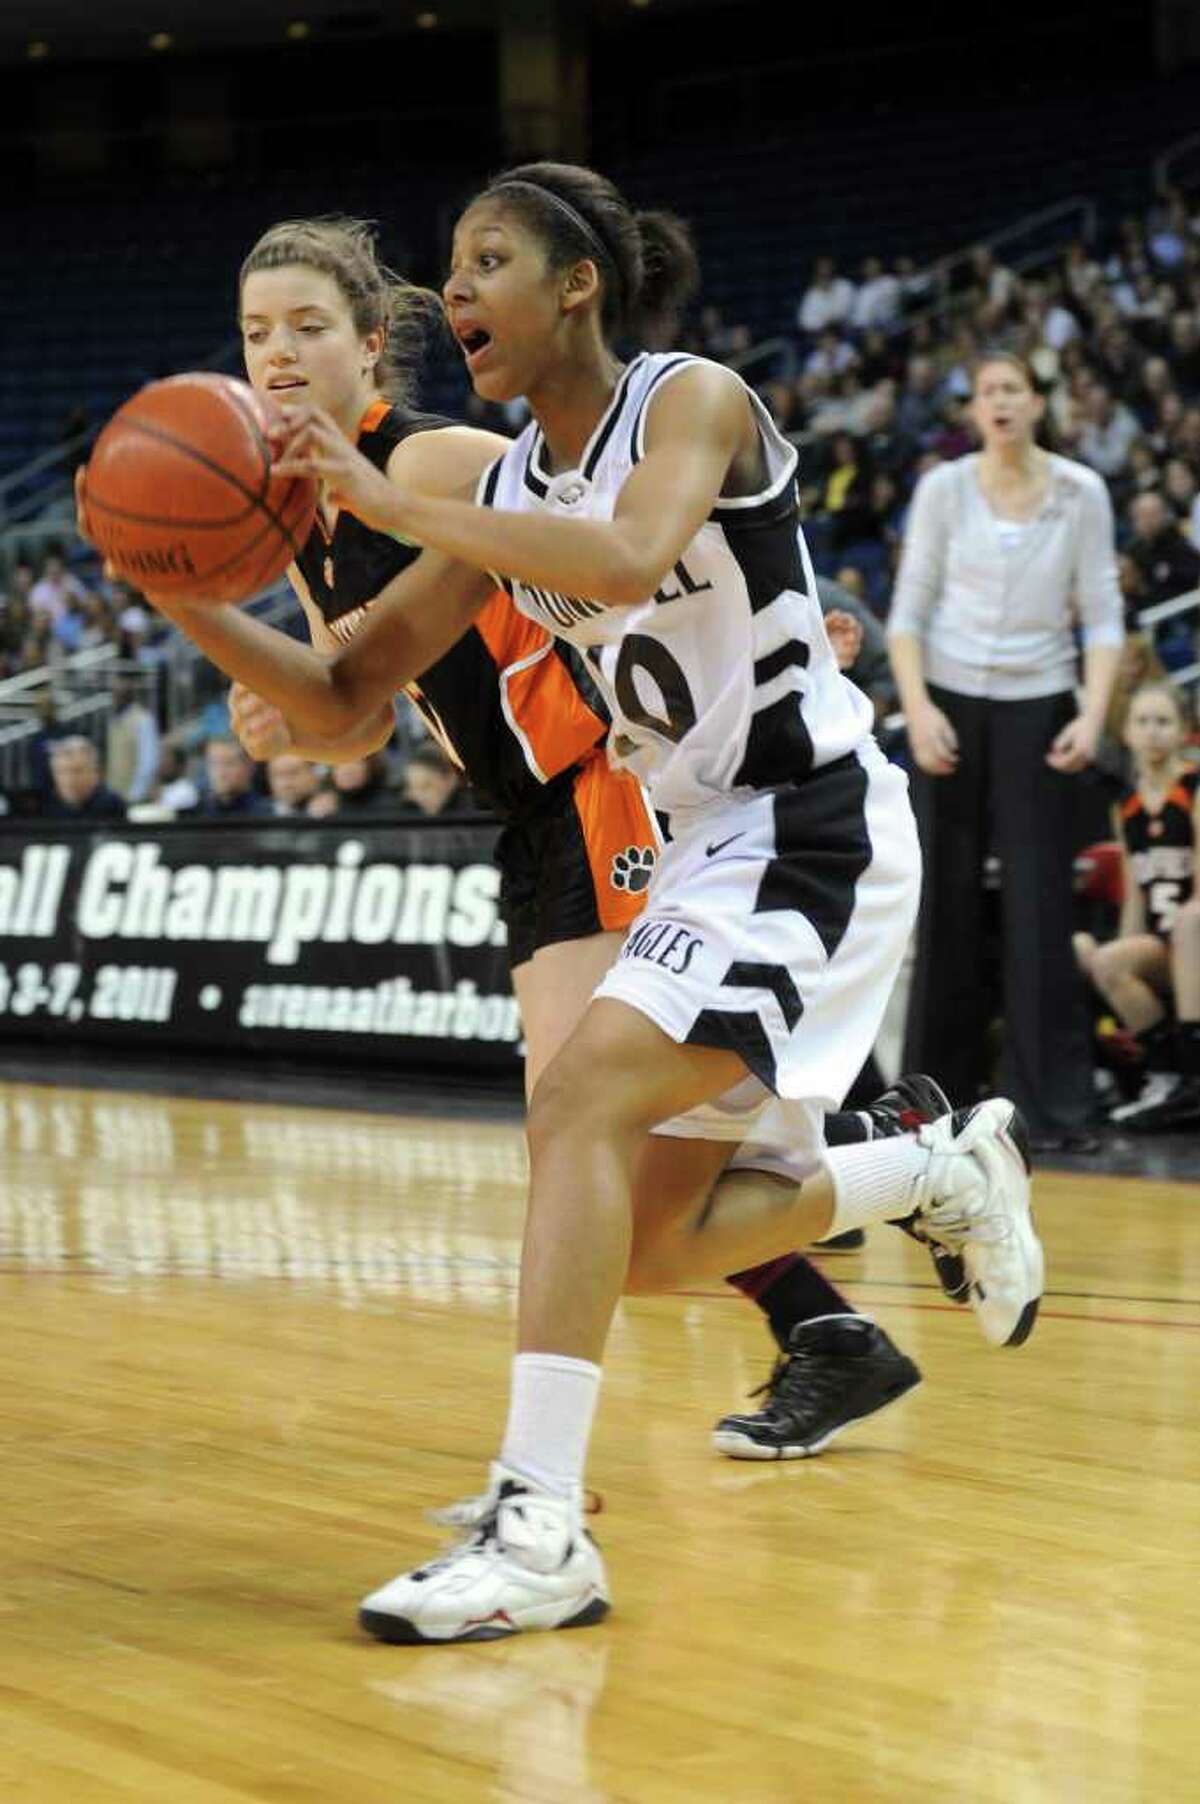 Trumbull's Mookie Kennedy dribbles during Thursday's FCIAC girls basketball championship game at Webster Bank Arena at Harbor Yard on February 24, 2011.